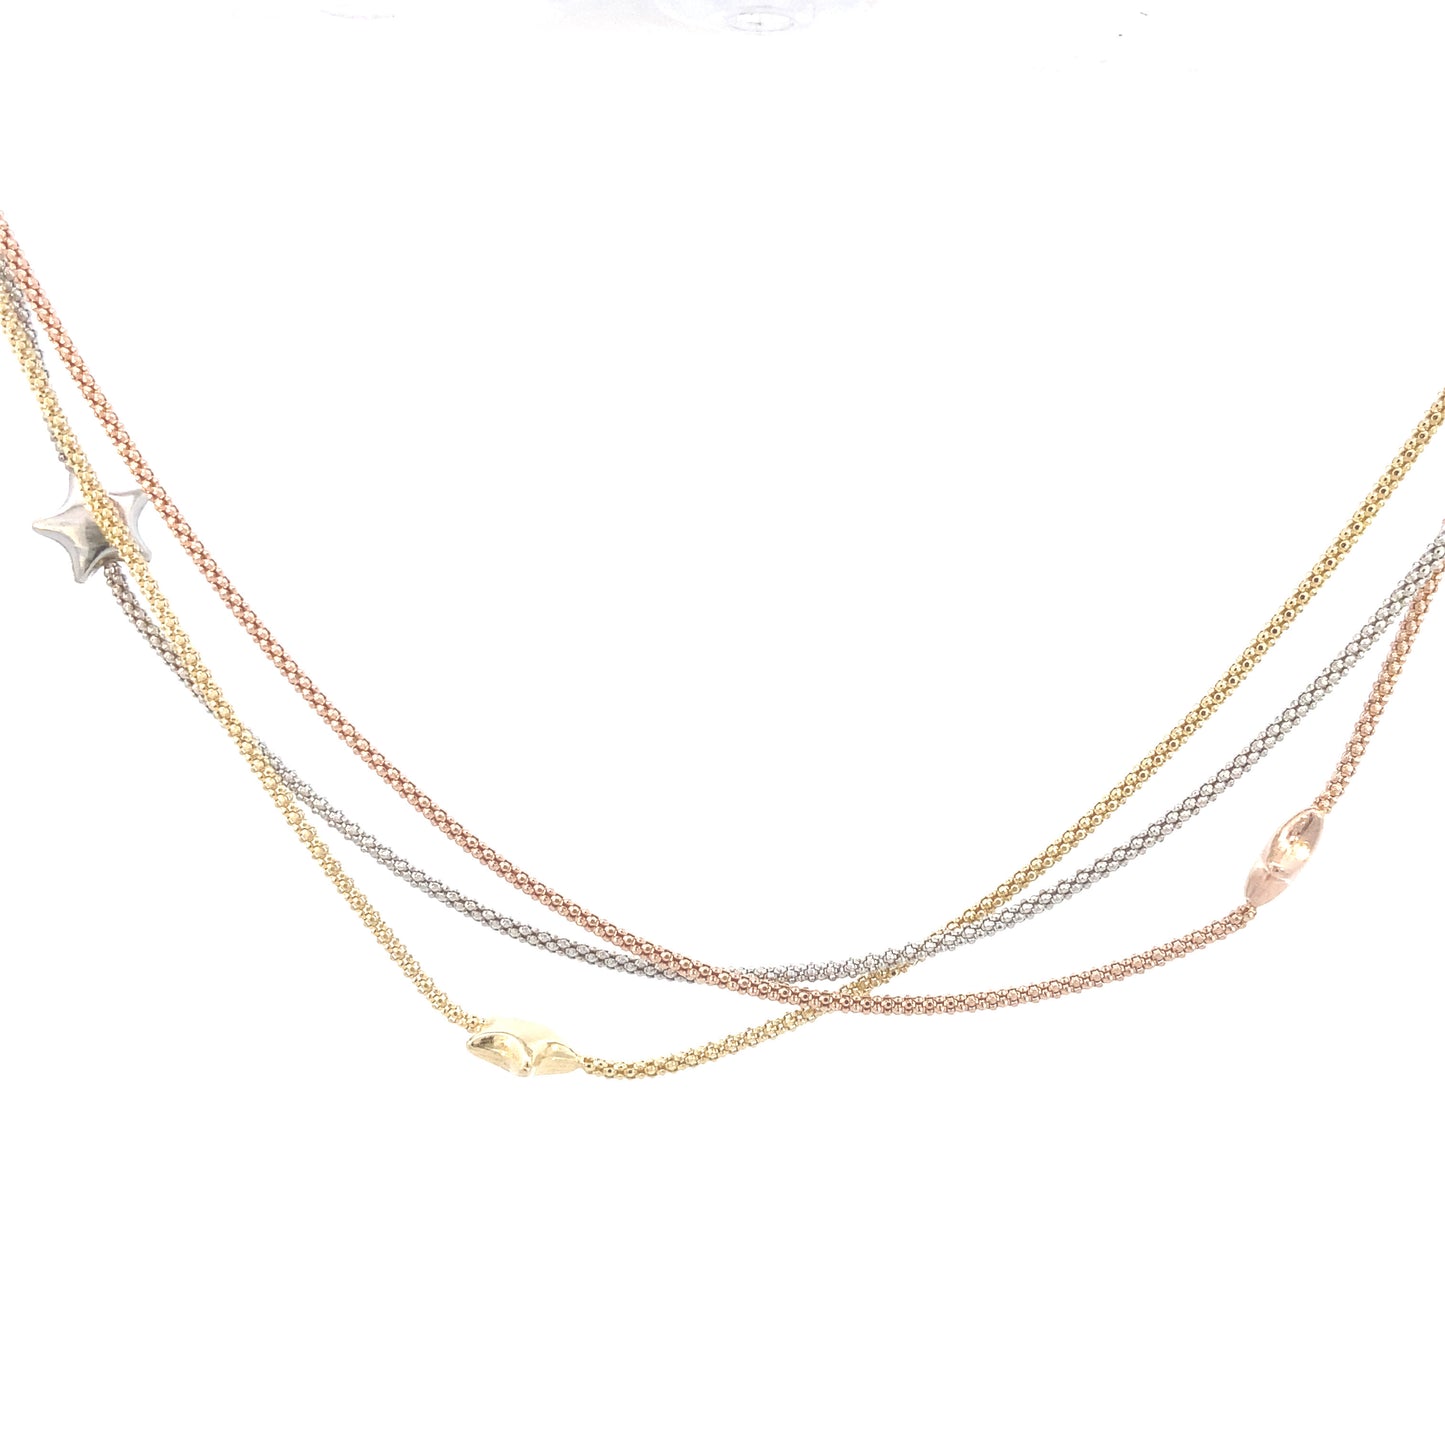 Three Color Star Necklace | Marcello Pane | Luby 